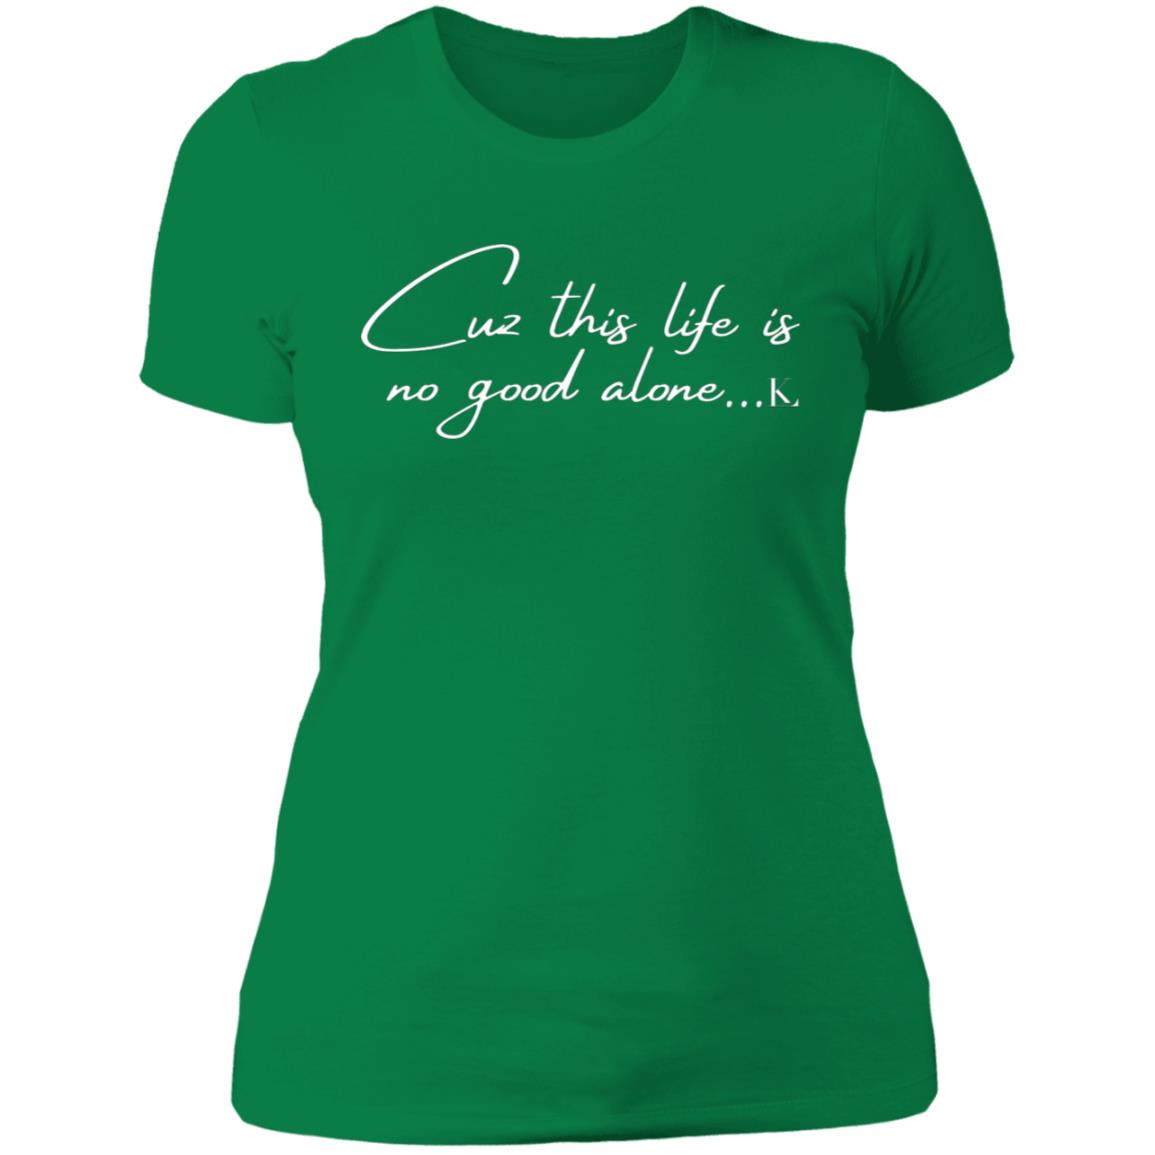 Cuz This Life Is No Good Alone... Women's Crew T-Shirt